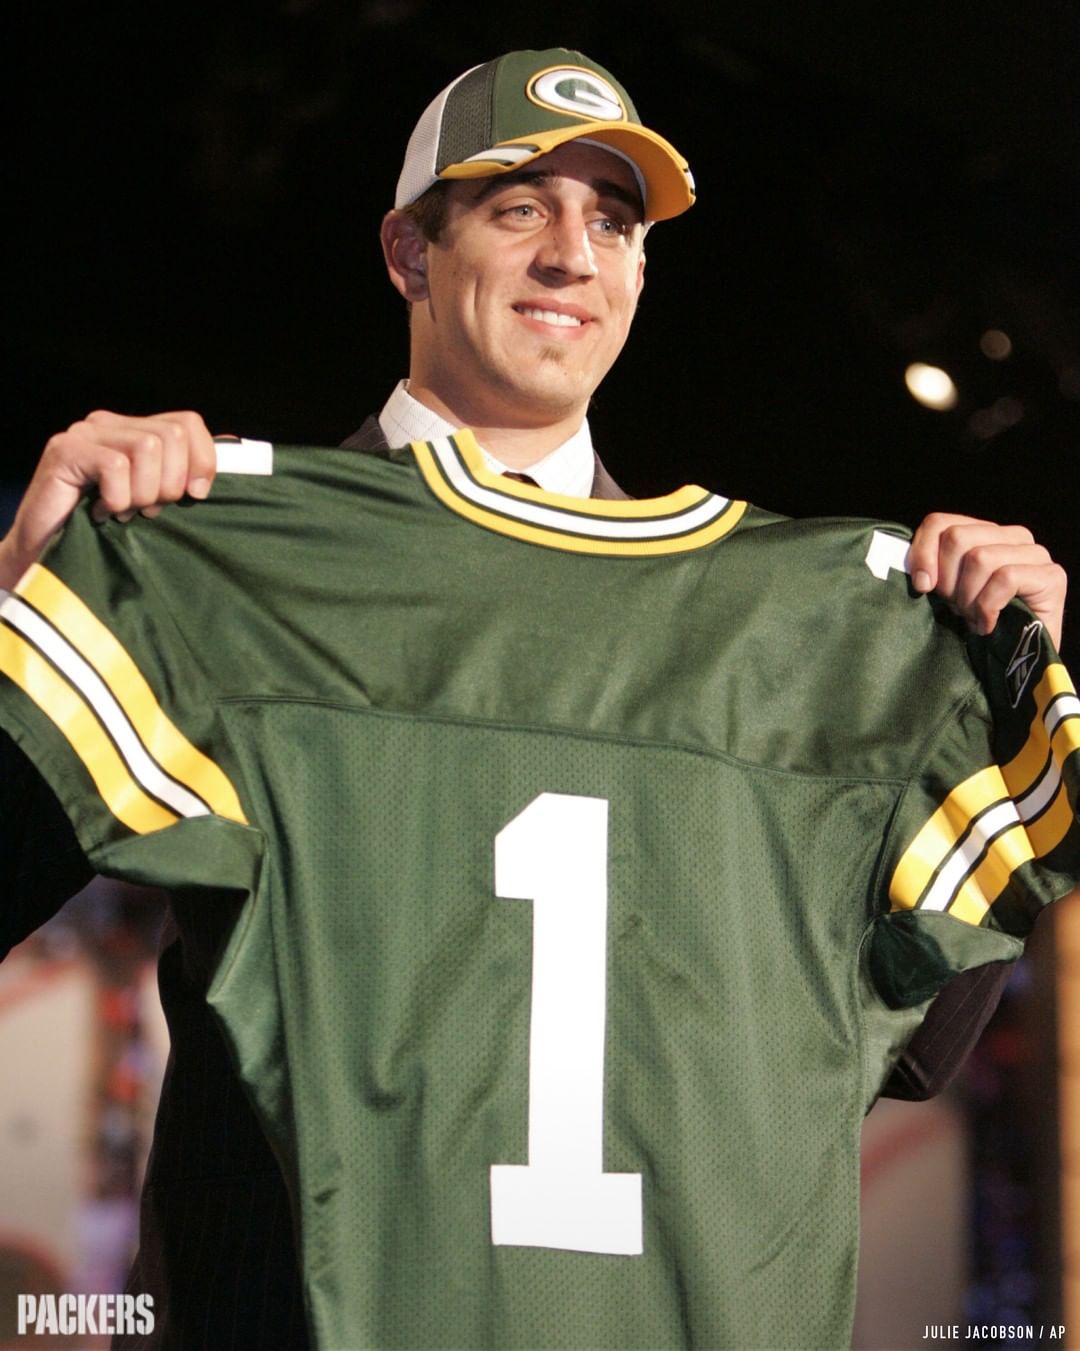 On this date: "With the 24th selection in the 2005 NFL Draft, the Green Bay Pack...